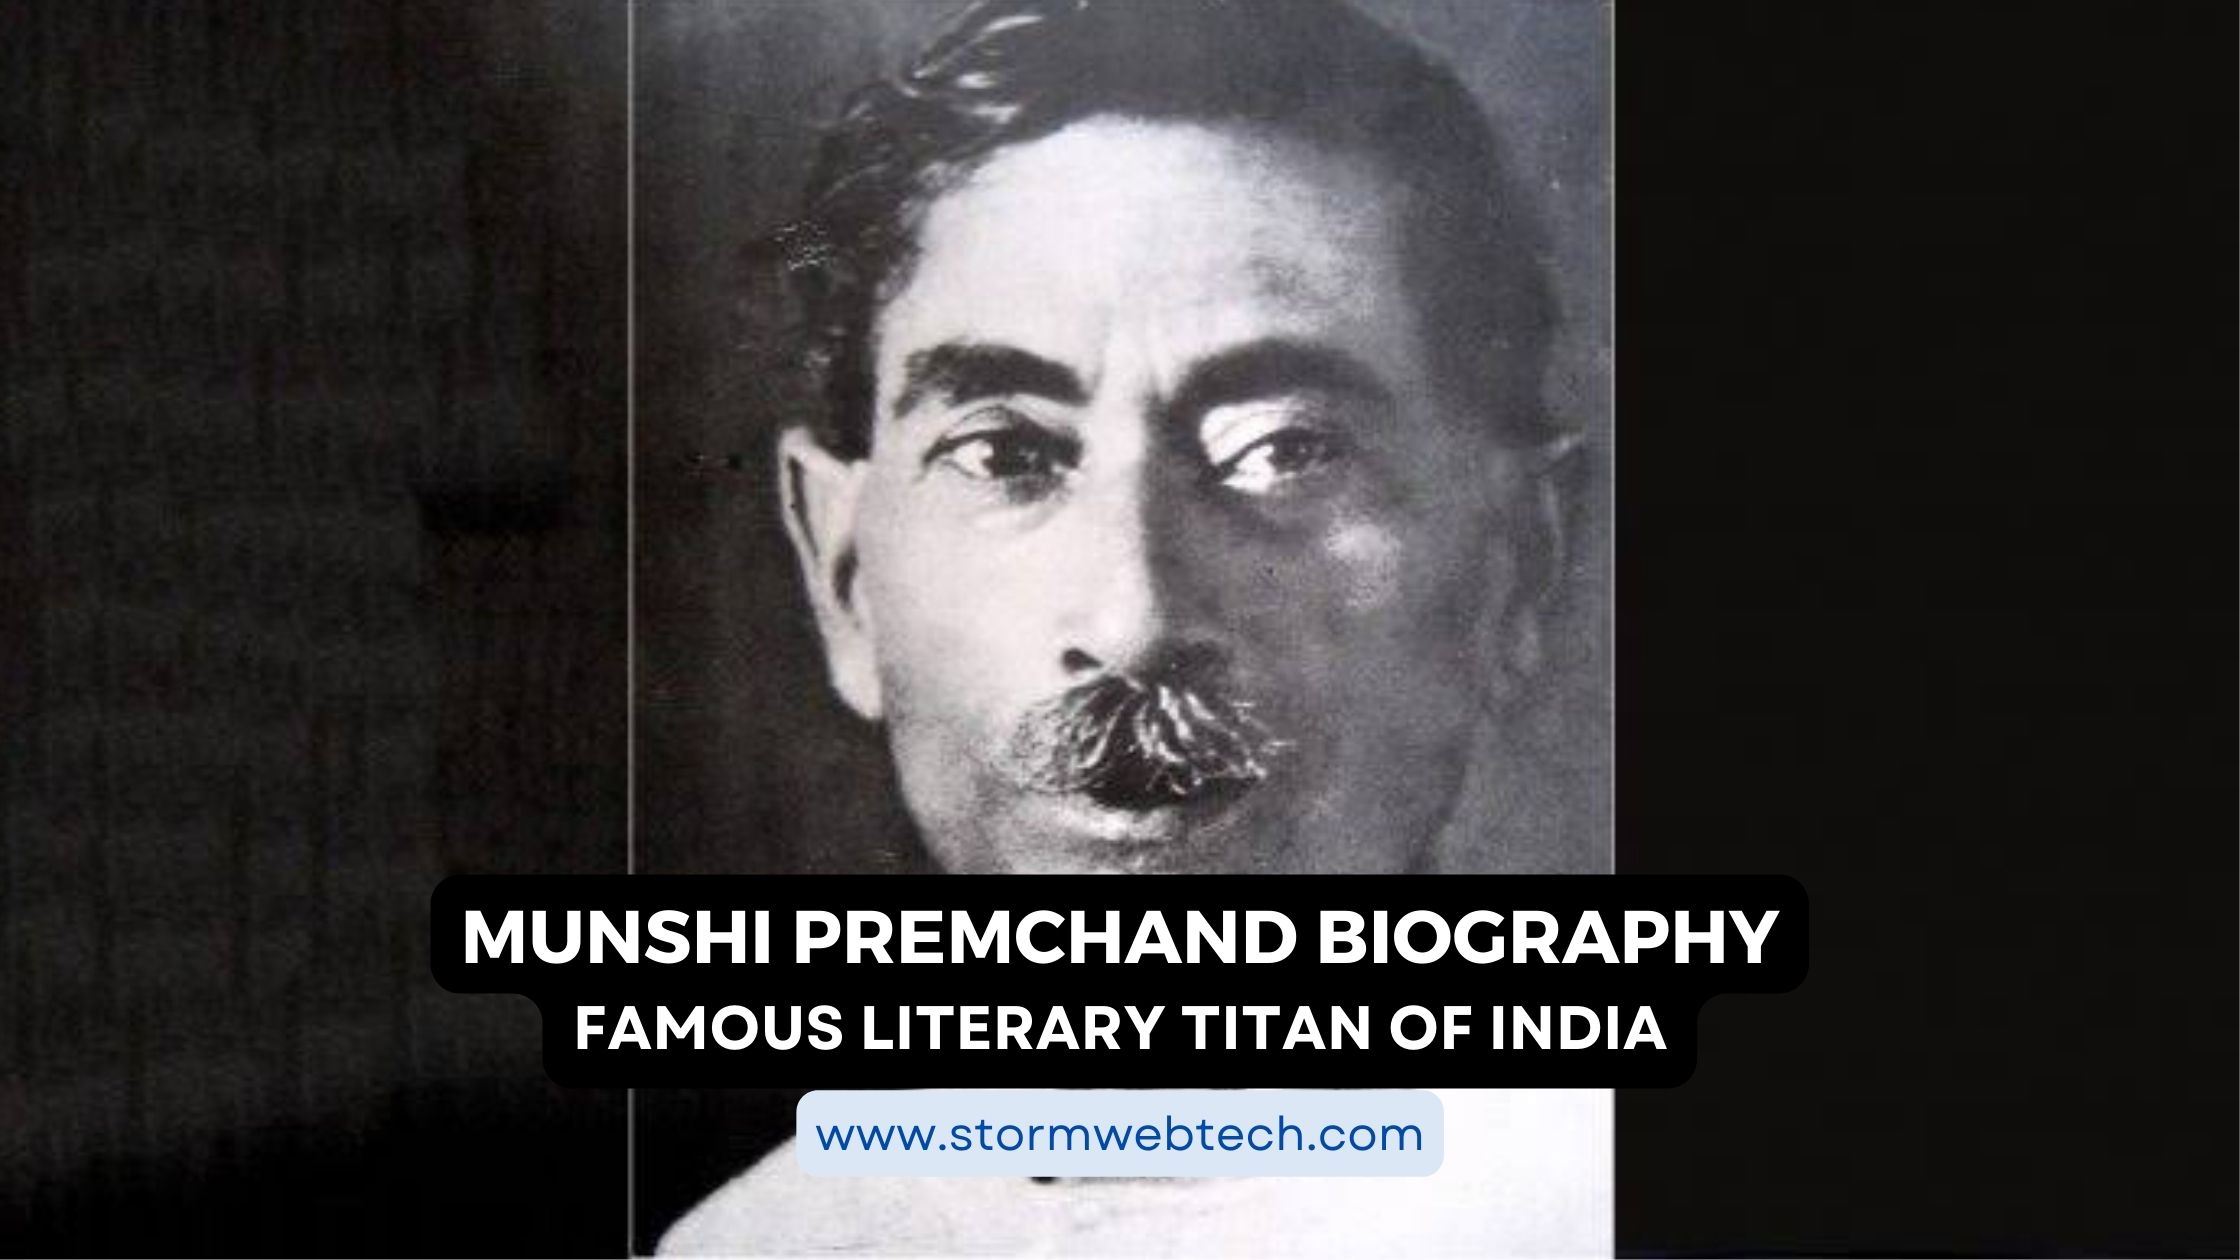 Munshi Premchand Biography : The Literary Titan of India, the life and literary contributions of this iconic figure Munshi Premchand